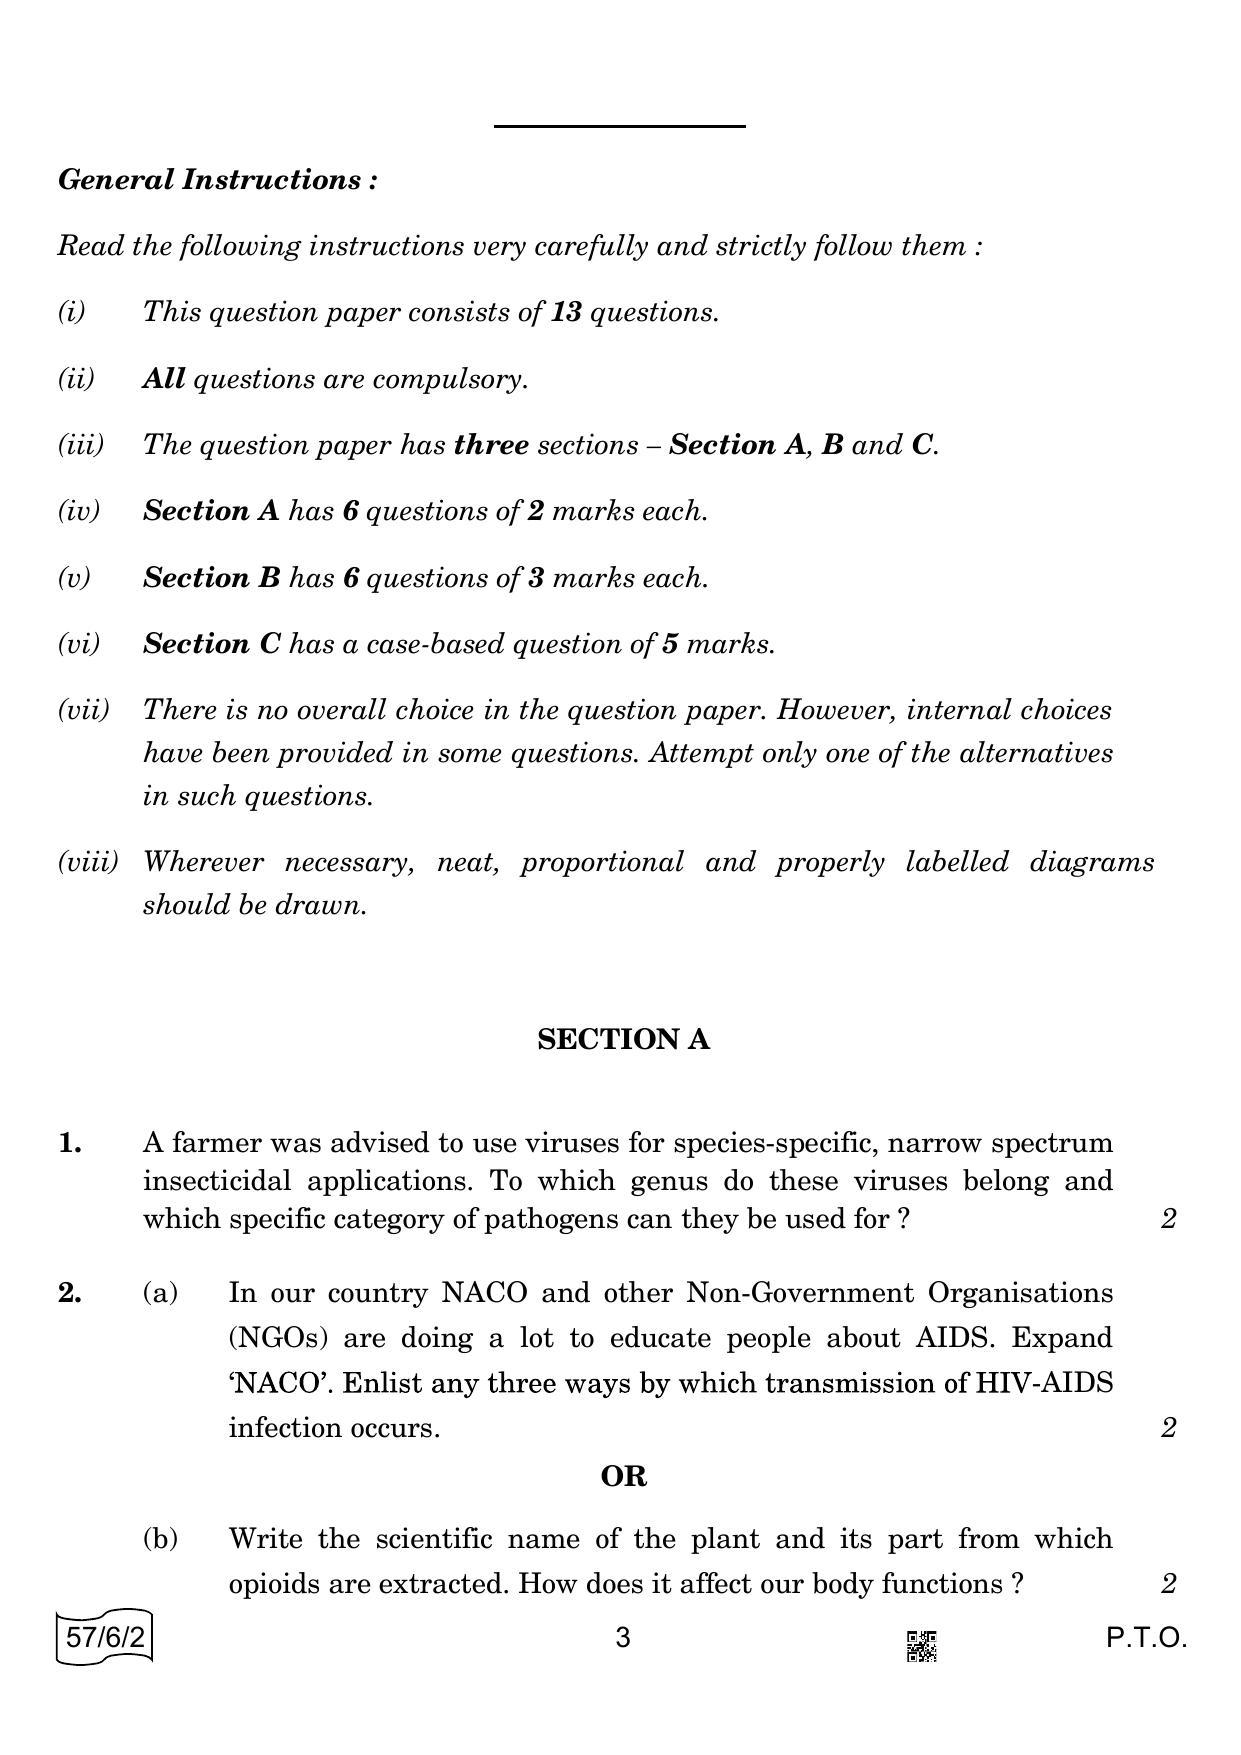 CBSE Class 12 57-6-2 BIOLOGY 2022 Compartment Question Paper - Page 3